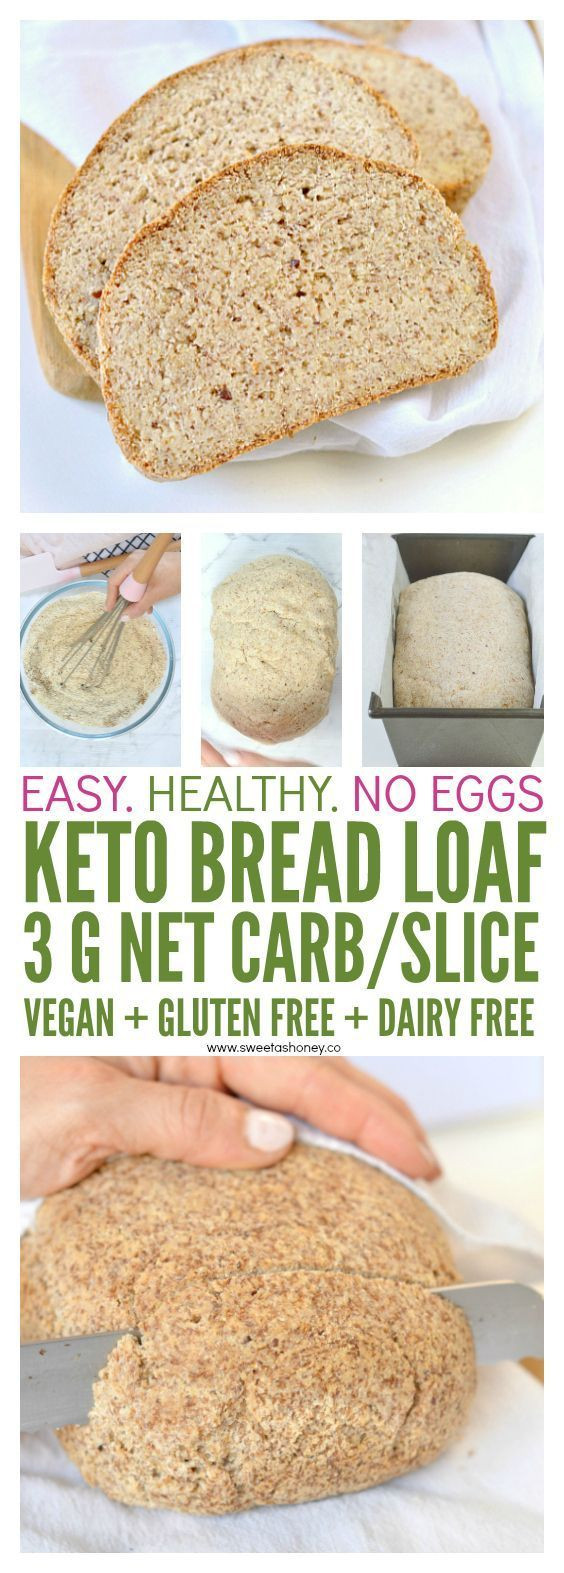 Vegan Keto Bread Almond Flour
 THE BEST KETO BREAD LOAF NO EGGS Low Carb with coconut